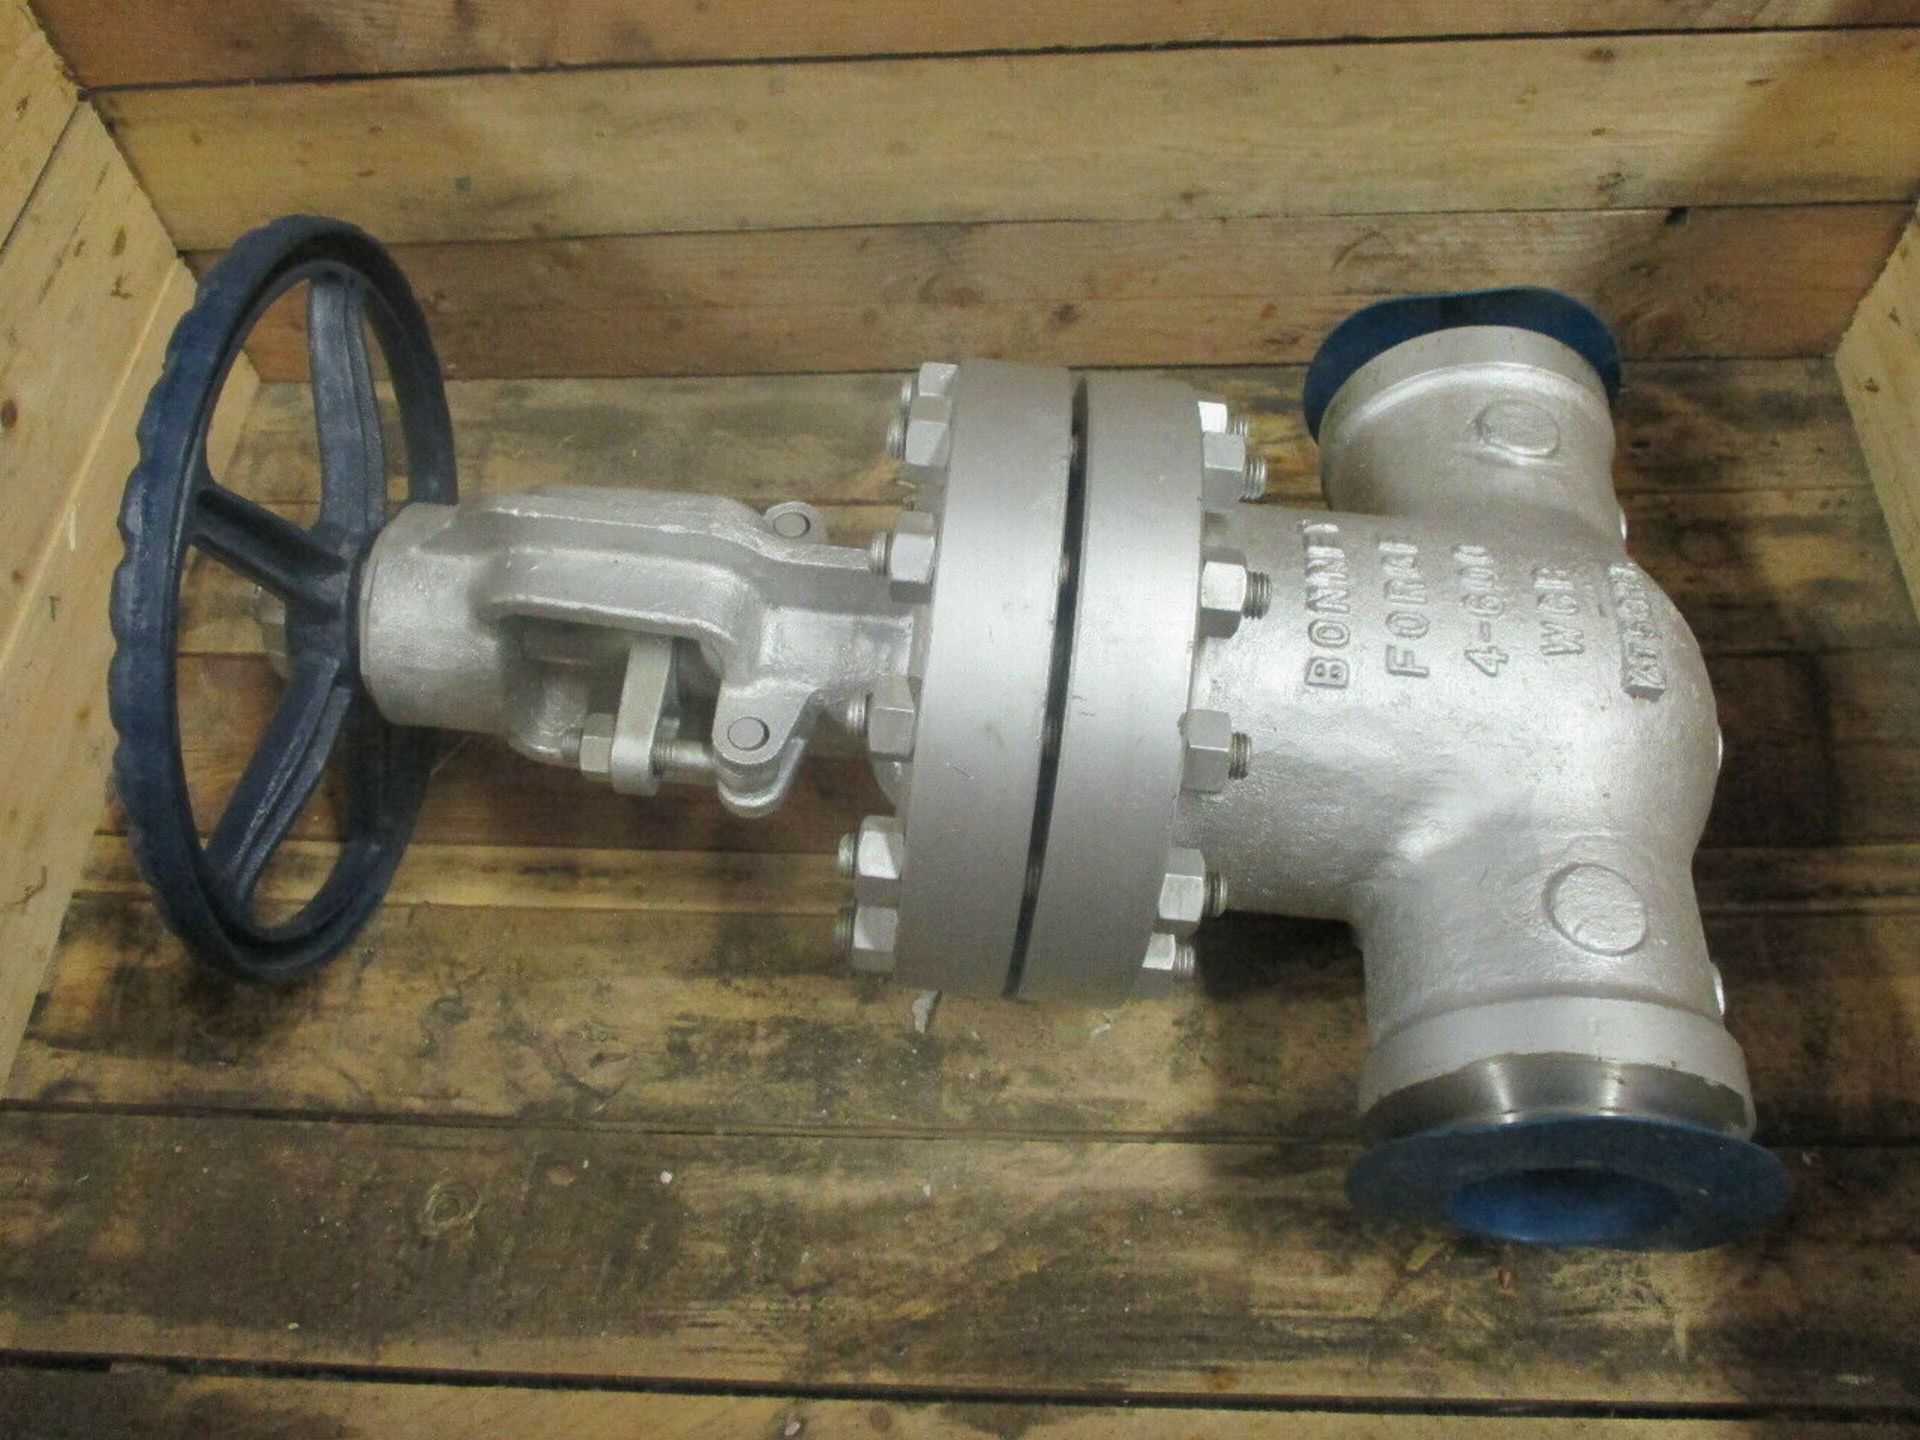 Bonney Forge 4" Gate Valve 600 Class 1480 Psi 6-11-BW80 - Image 3 of 3